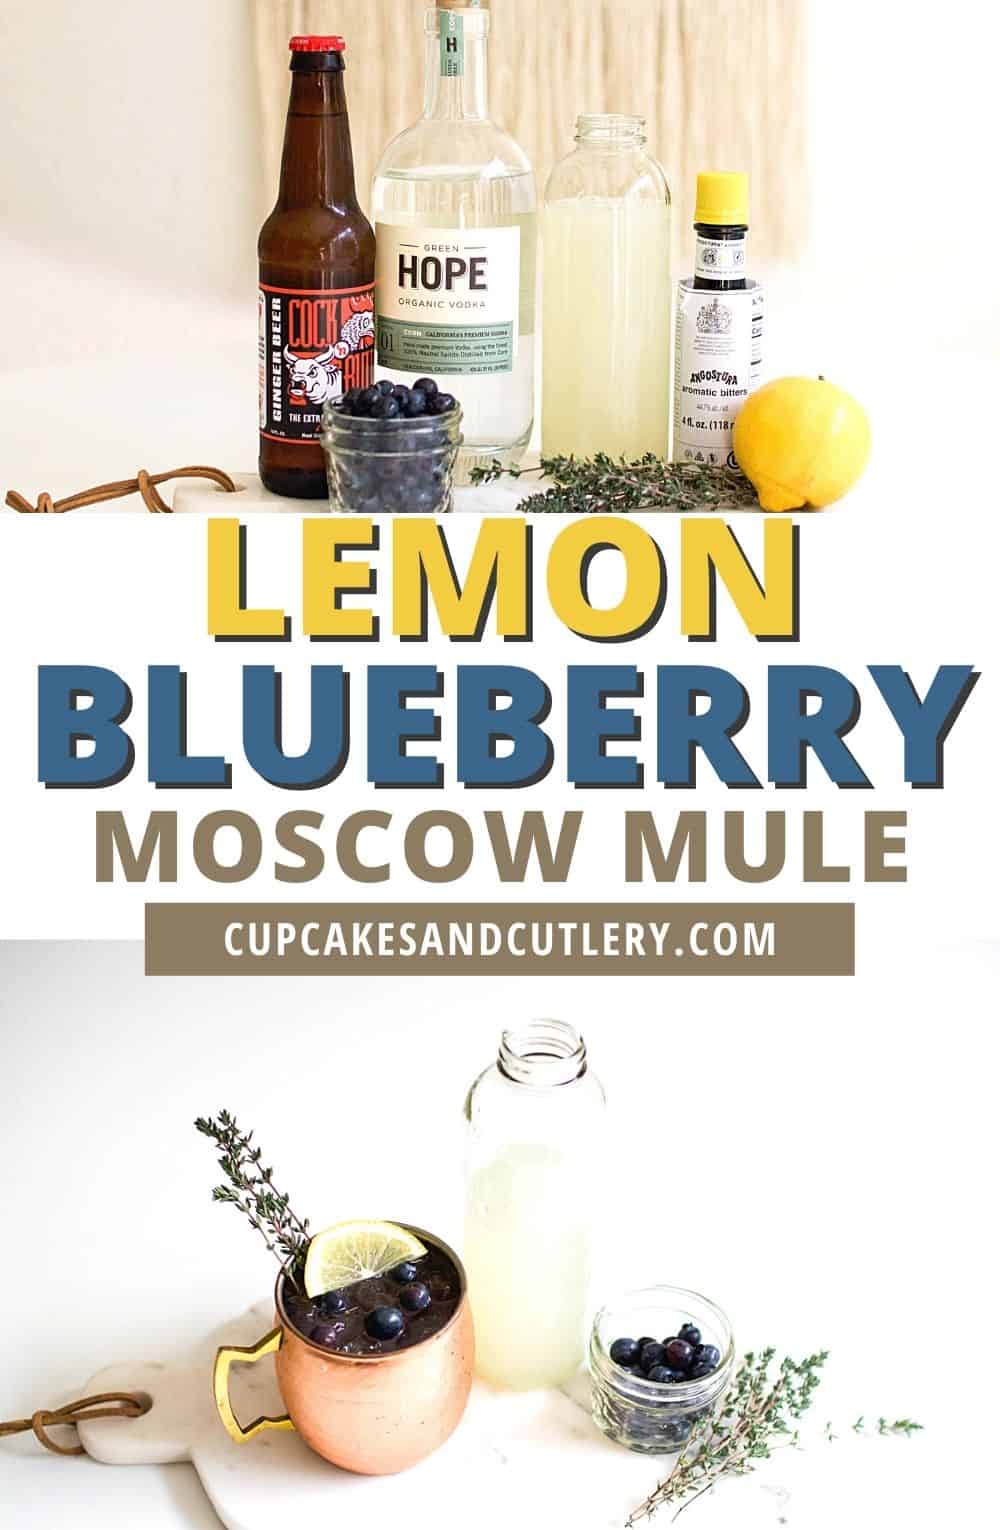 Lemon Blueberry Moscow Mule Recipe - Cupcakes and Cutlery